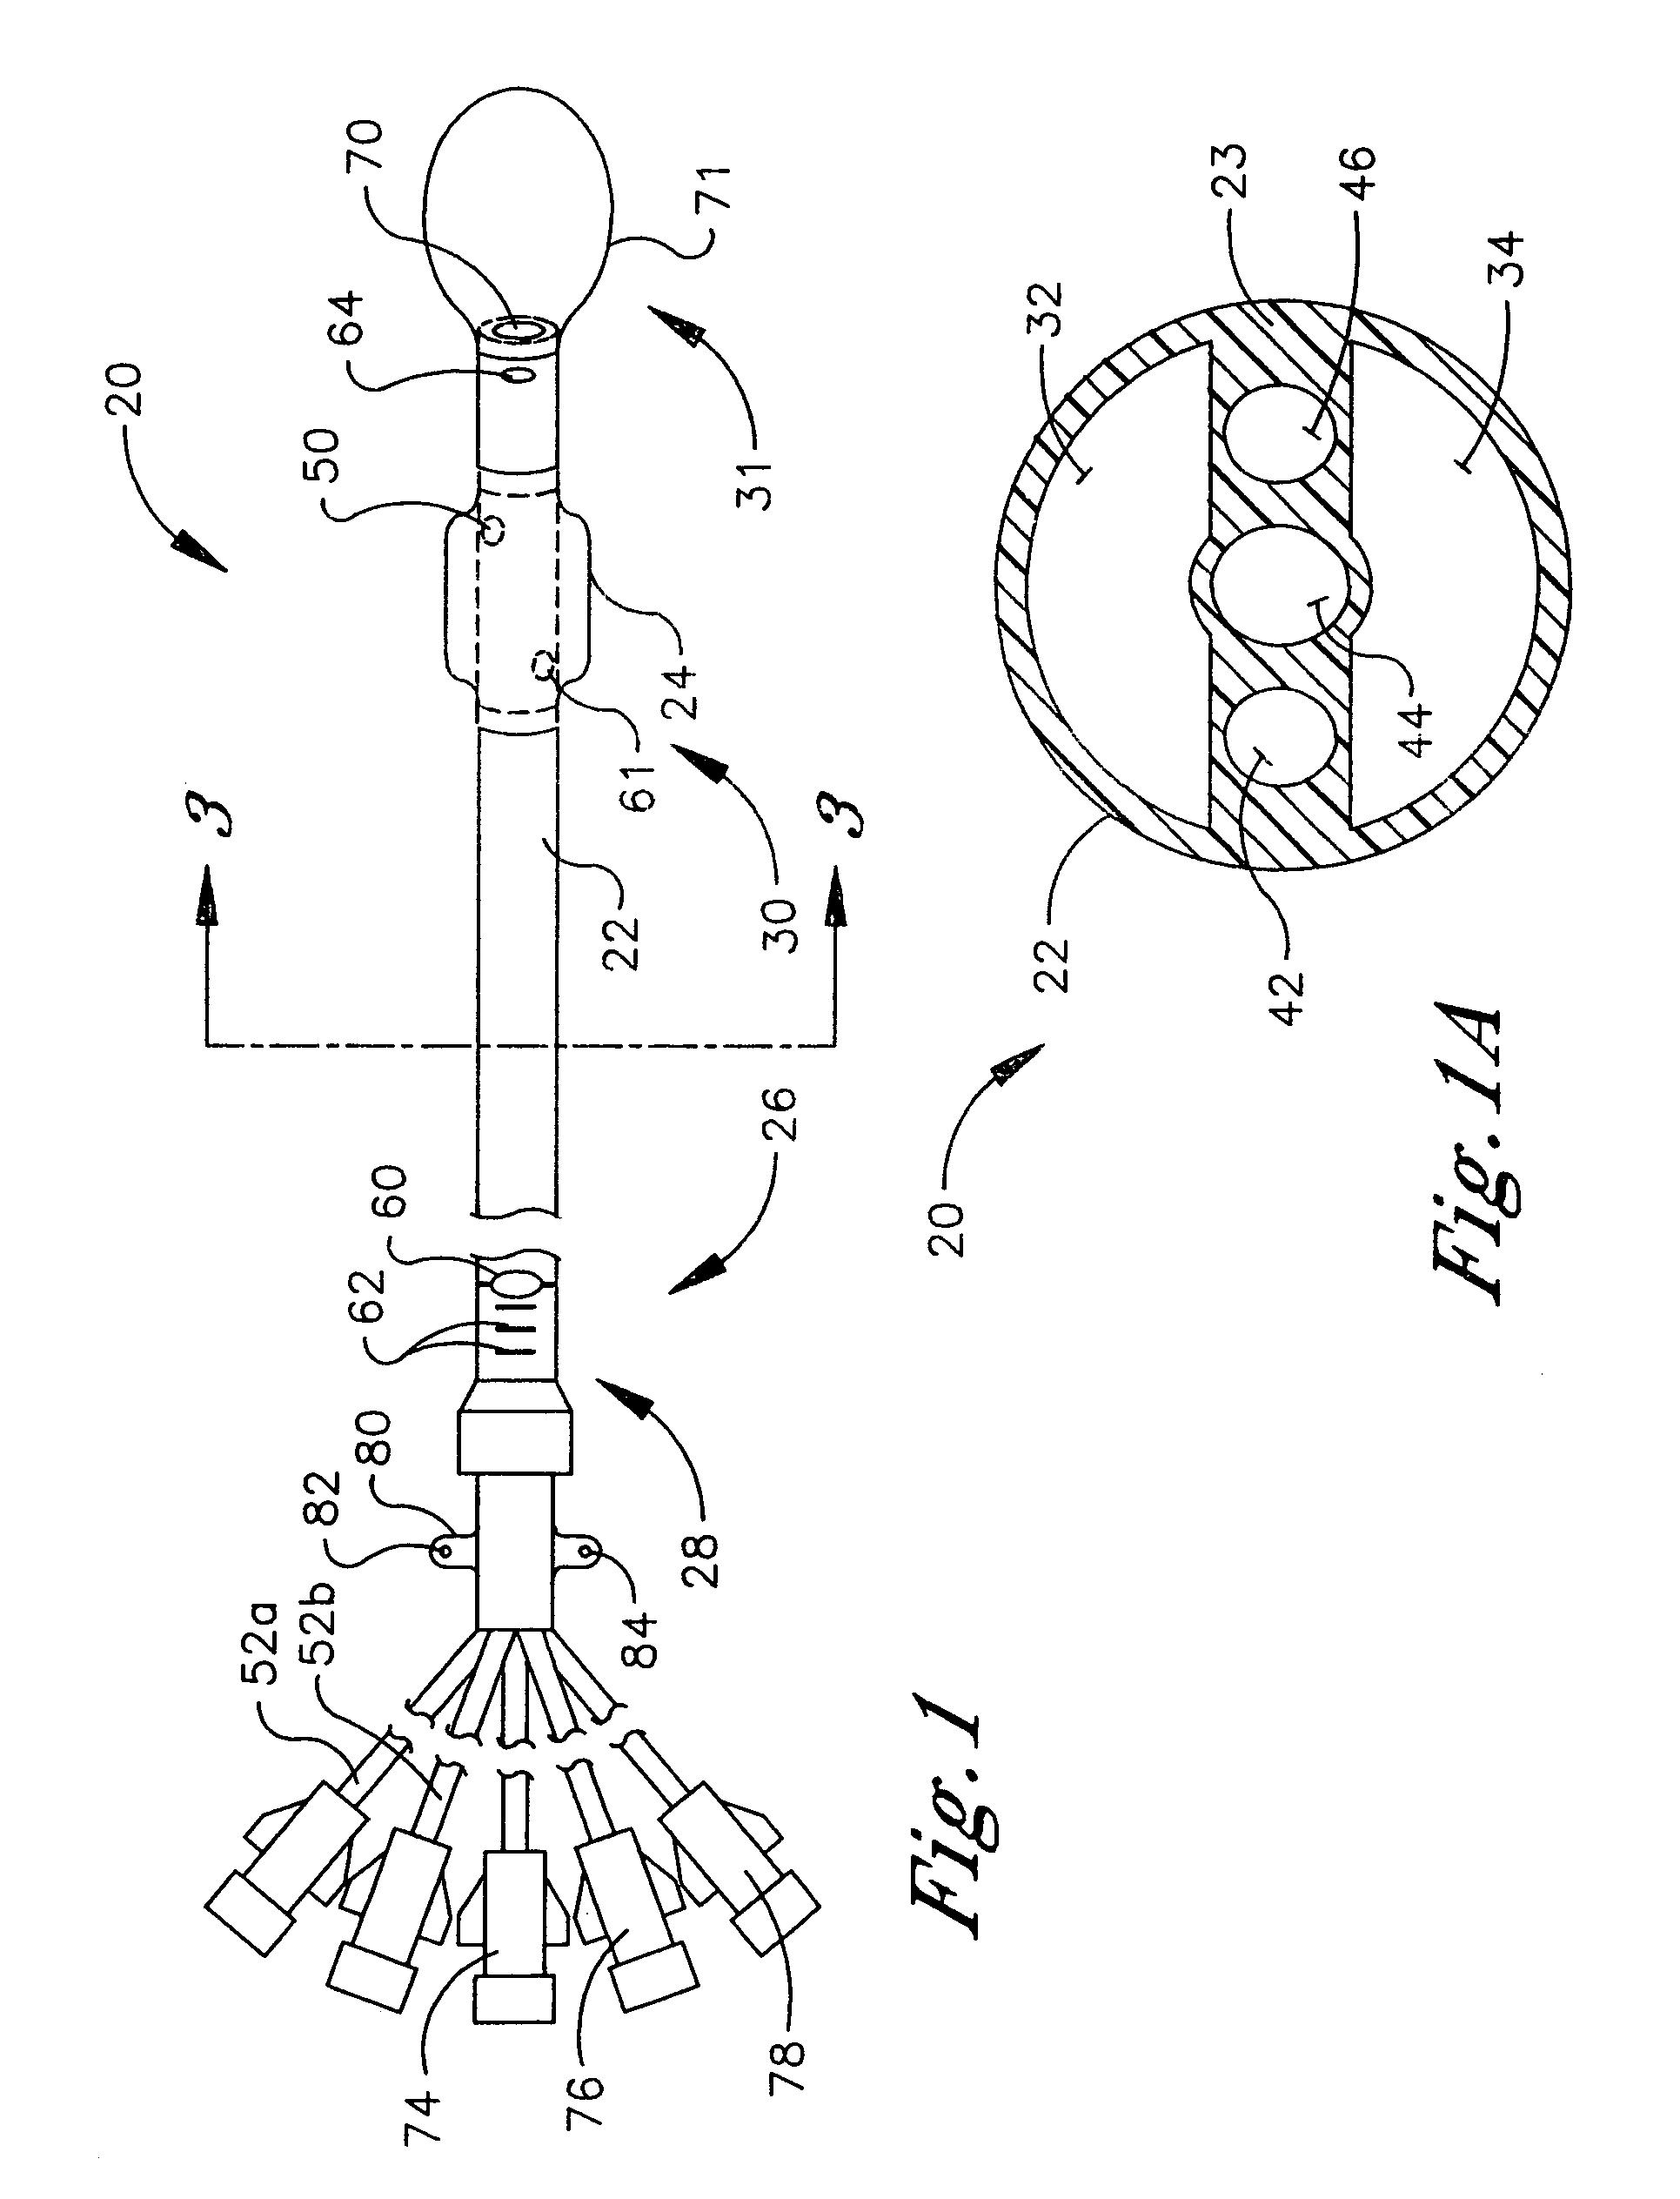 Cardiovascular intra aortic balloon pump catheter with heat exchange function and methods of use